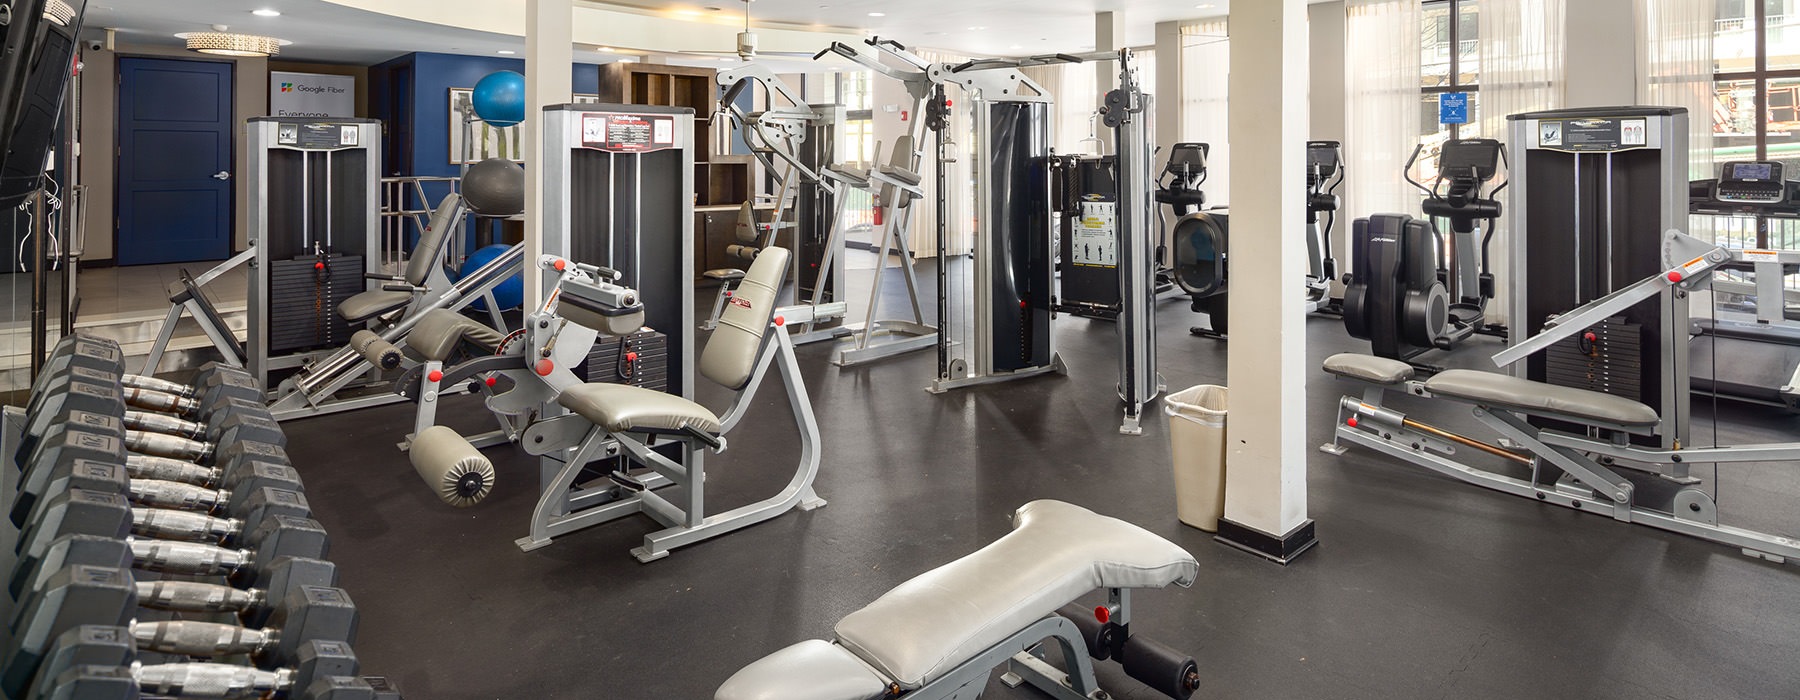 exercise equipment in a room